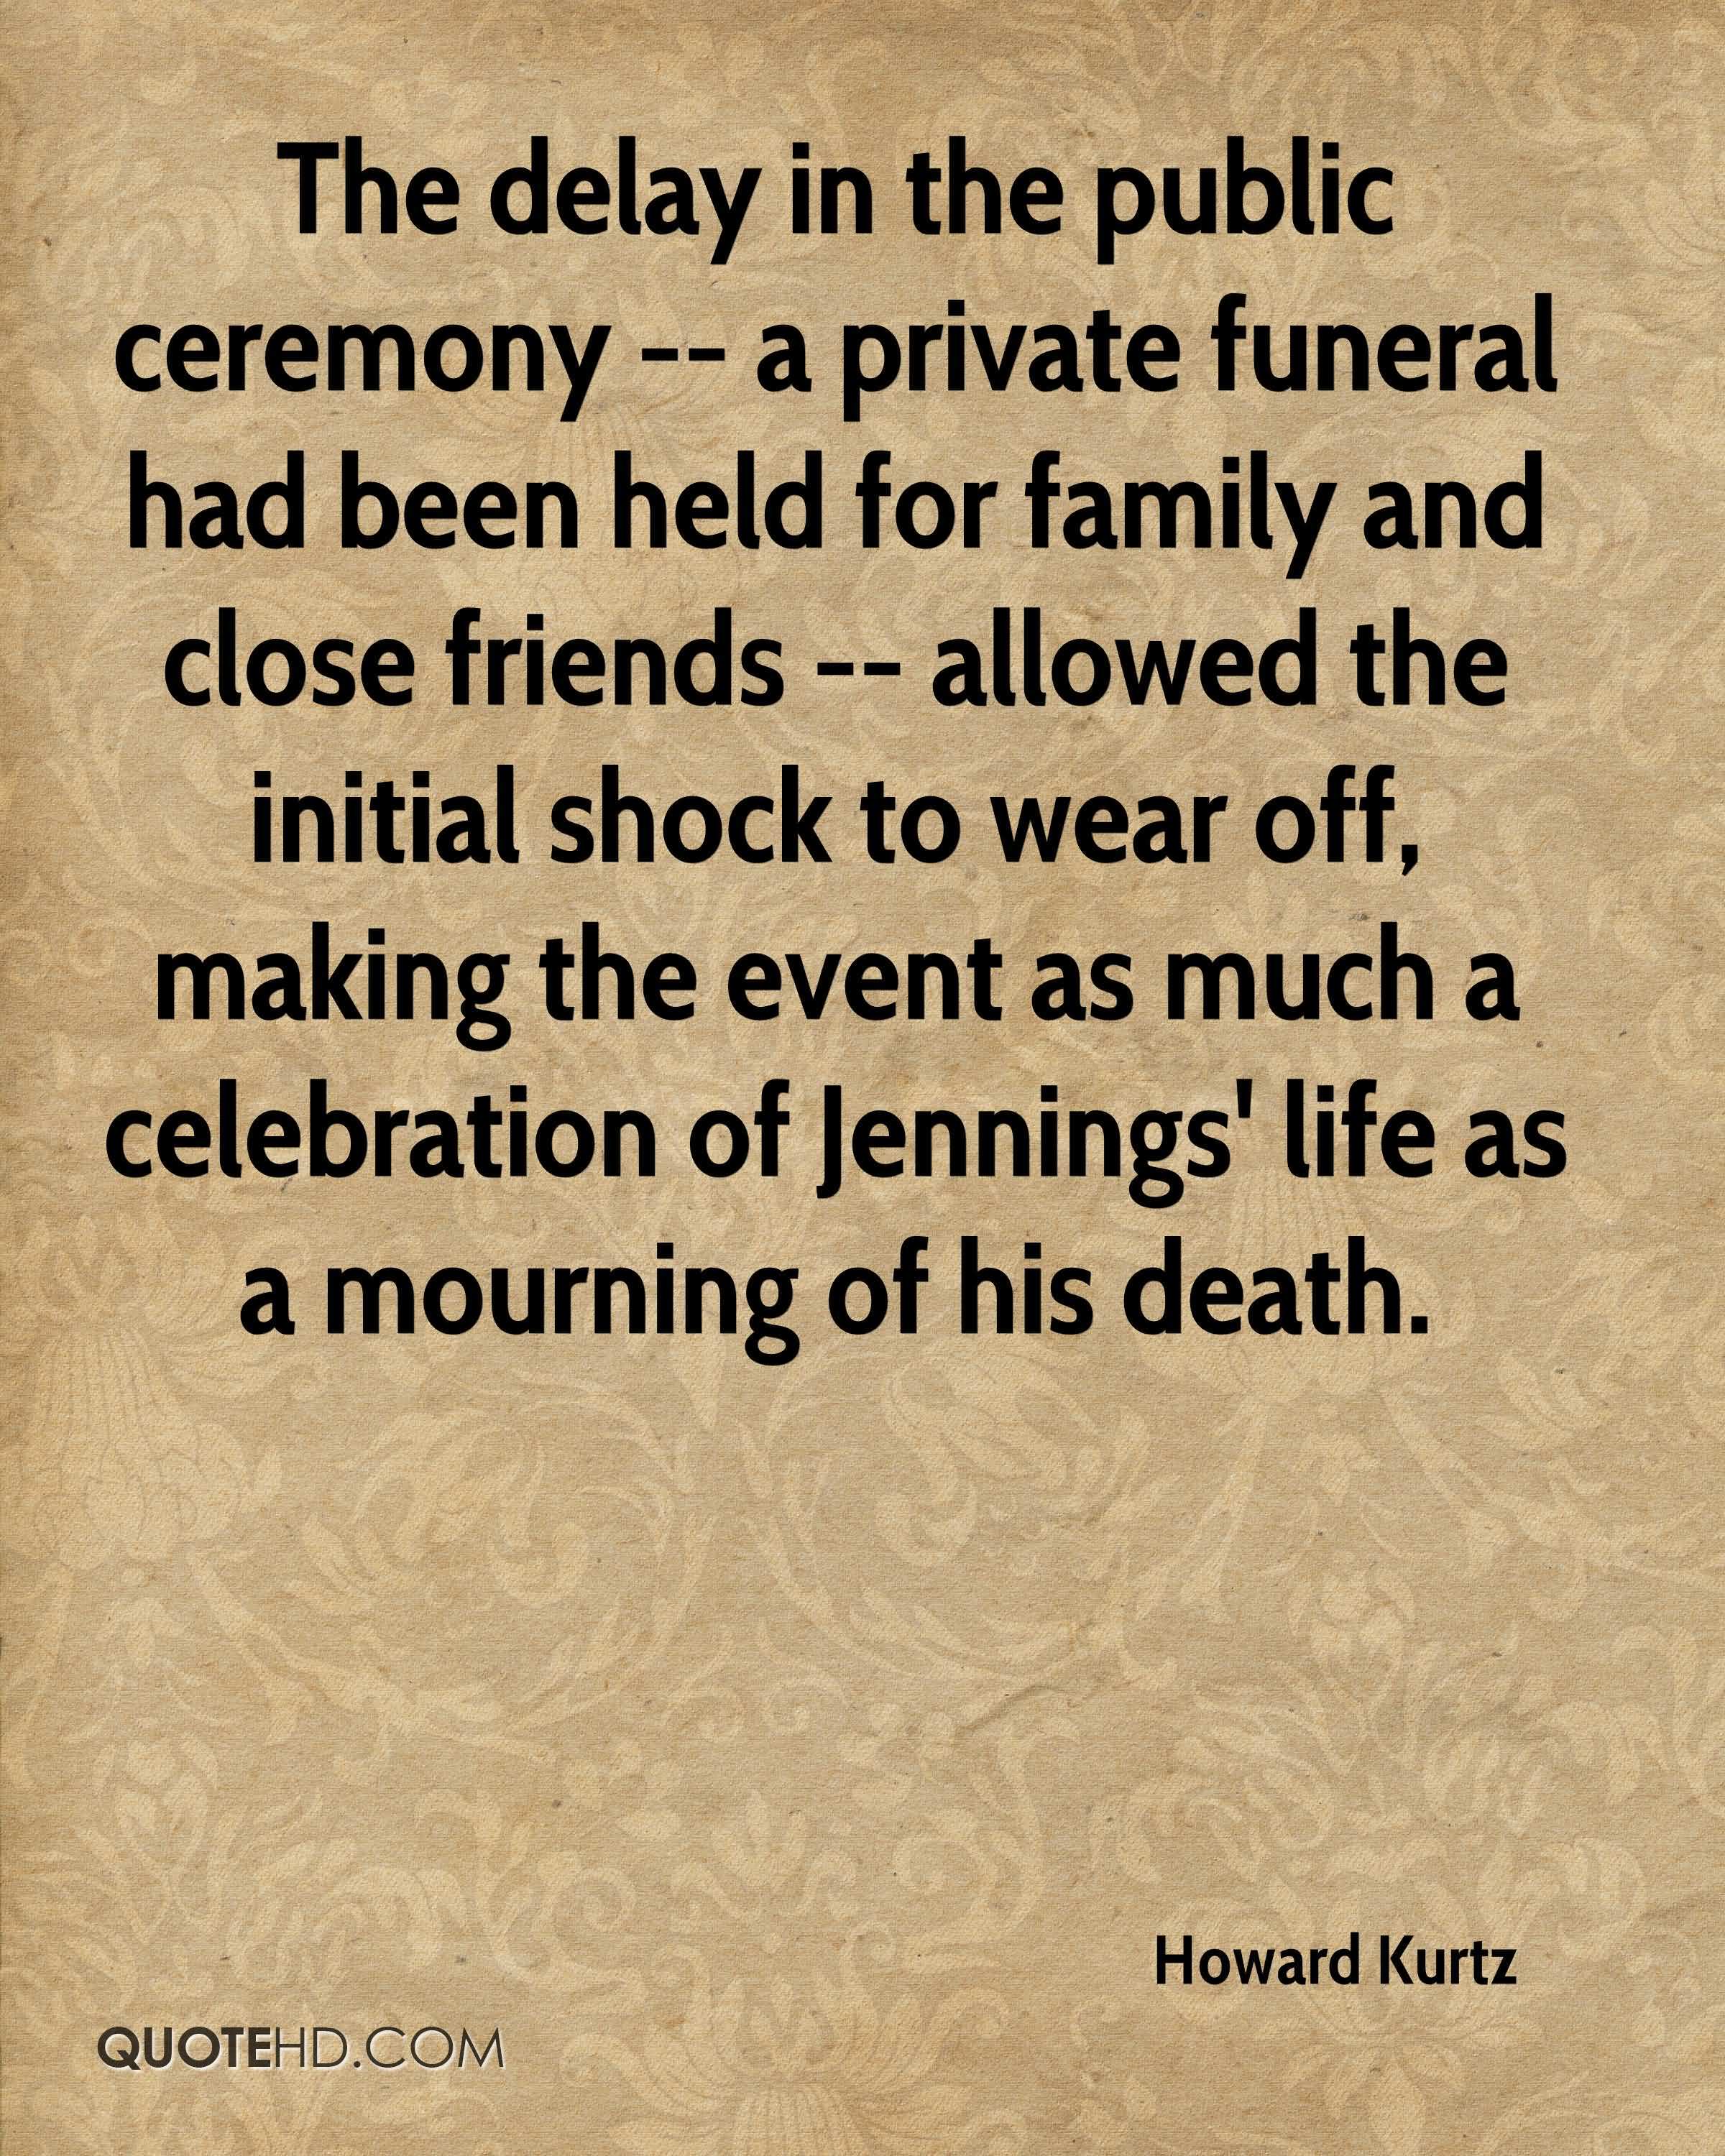 Celebration Of Life Quotes Death 07